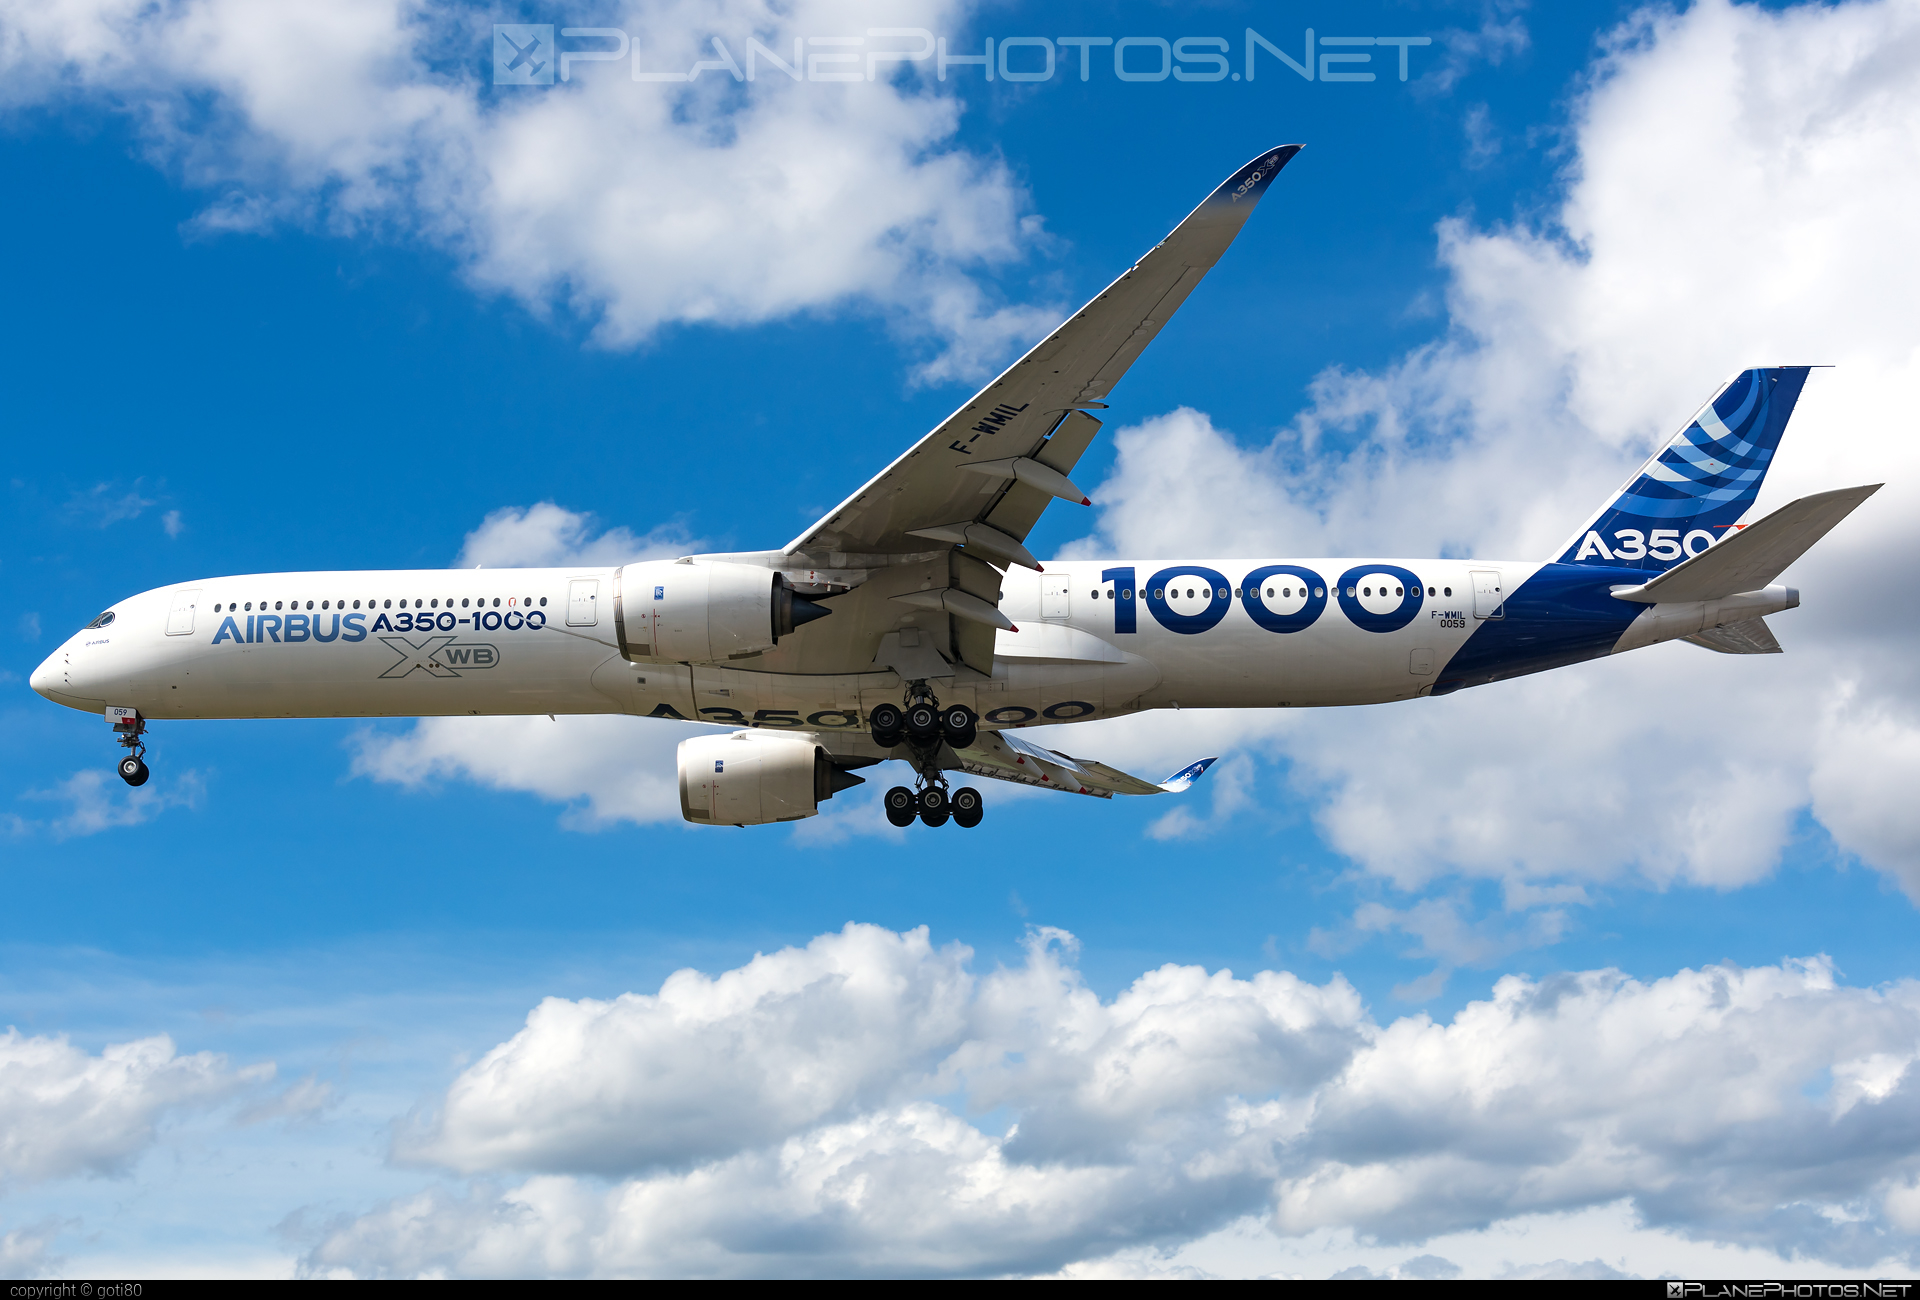 Airbus A350-1041 - F-WMIL operated by Airbus Industrie #a350 #a350family #airbus #airbus350 #xwb